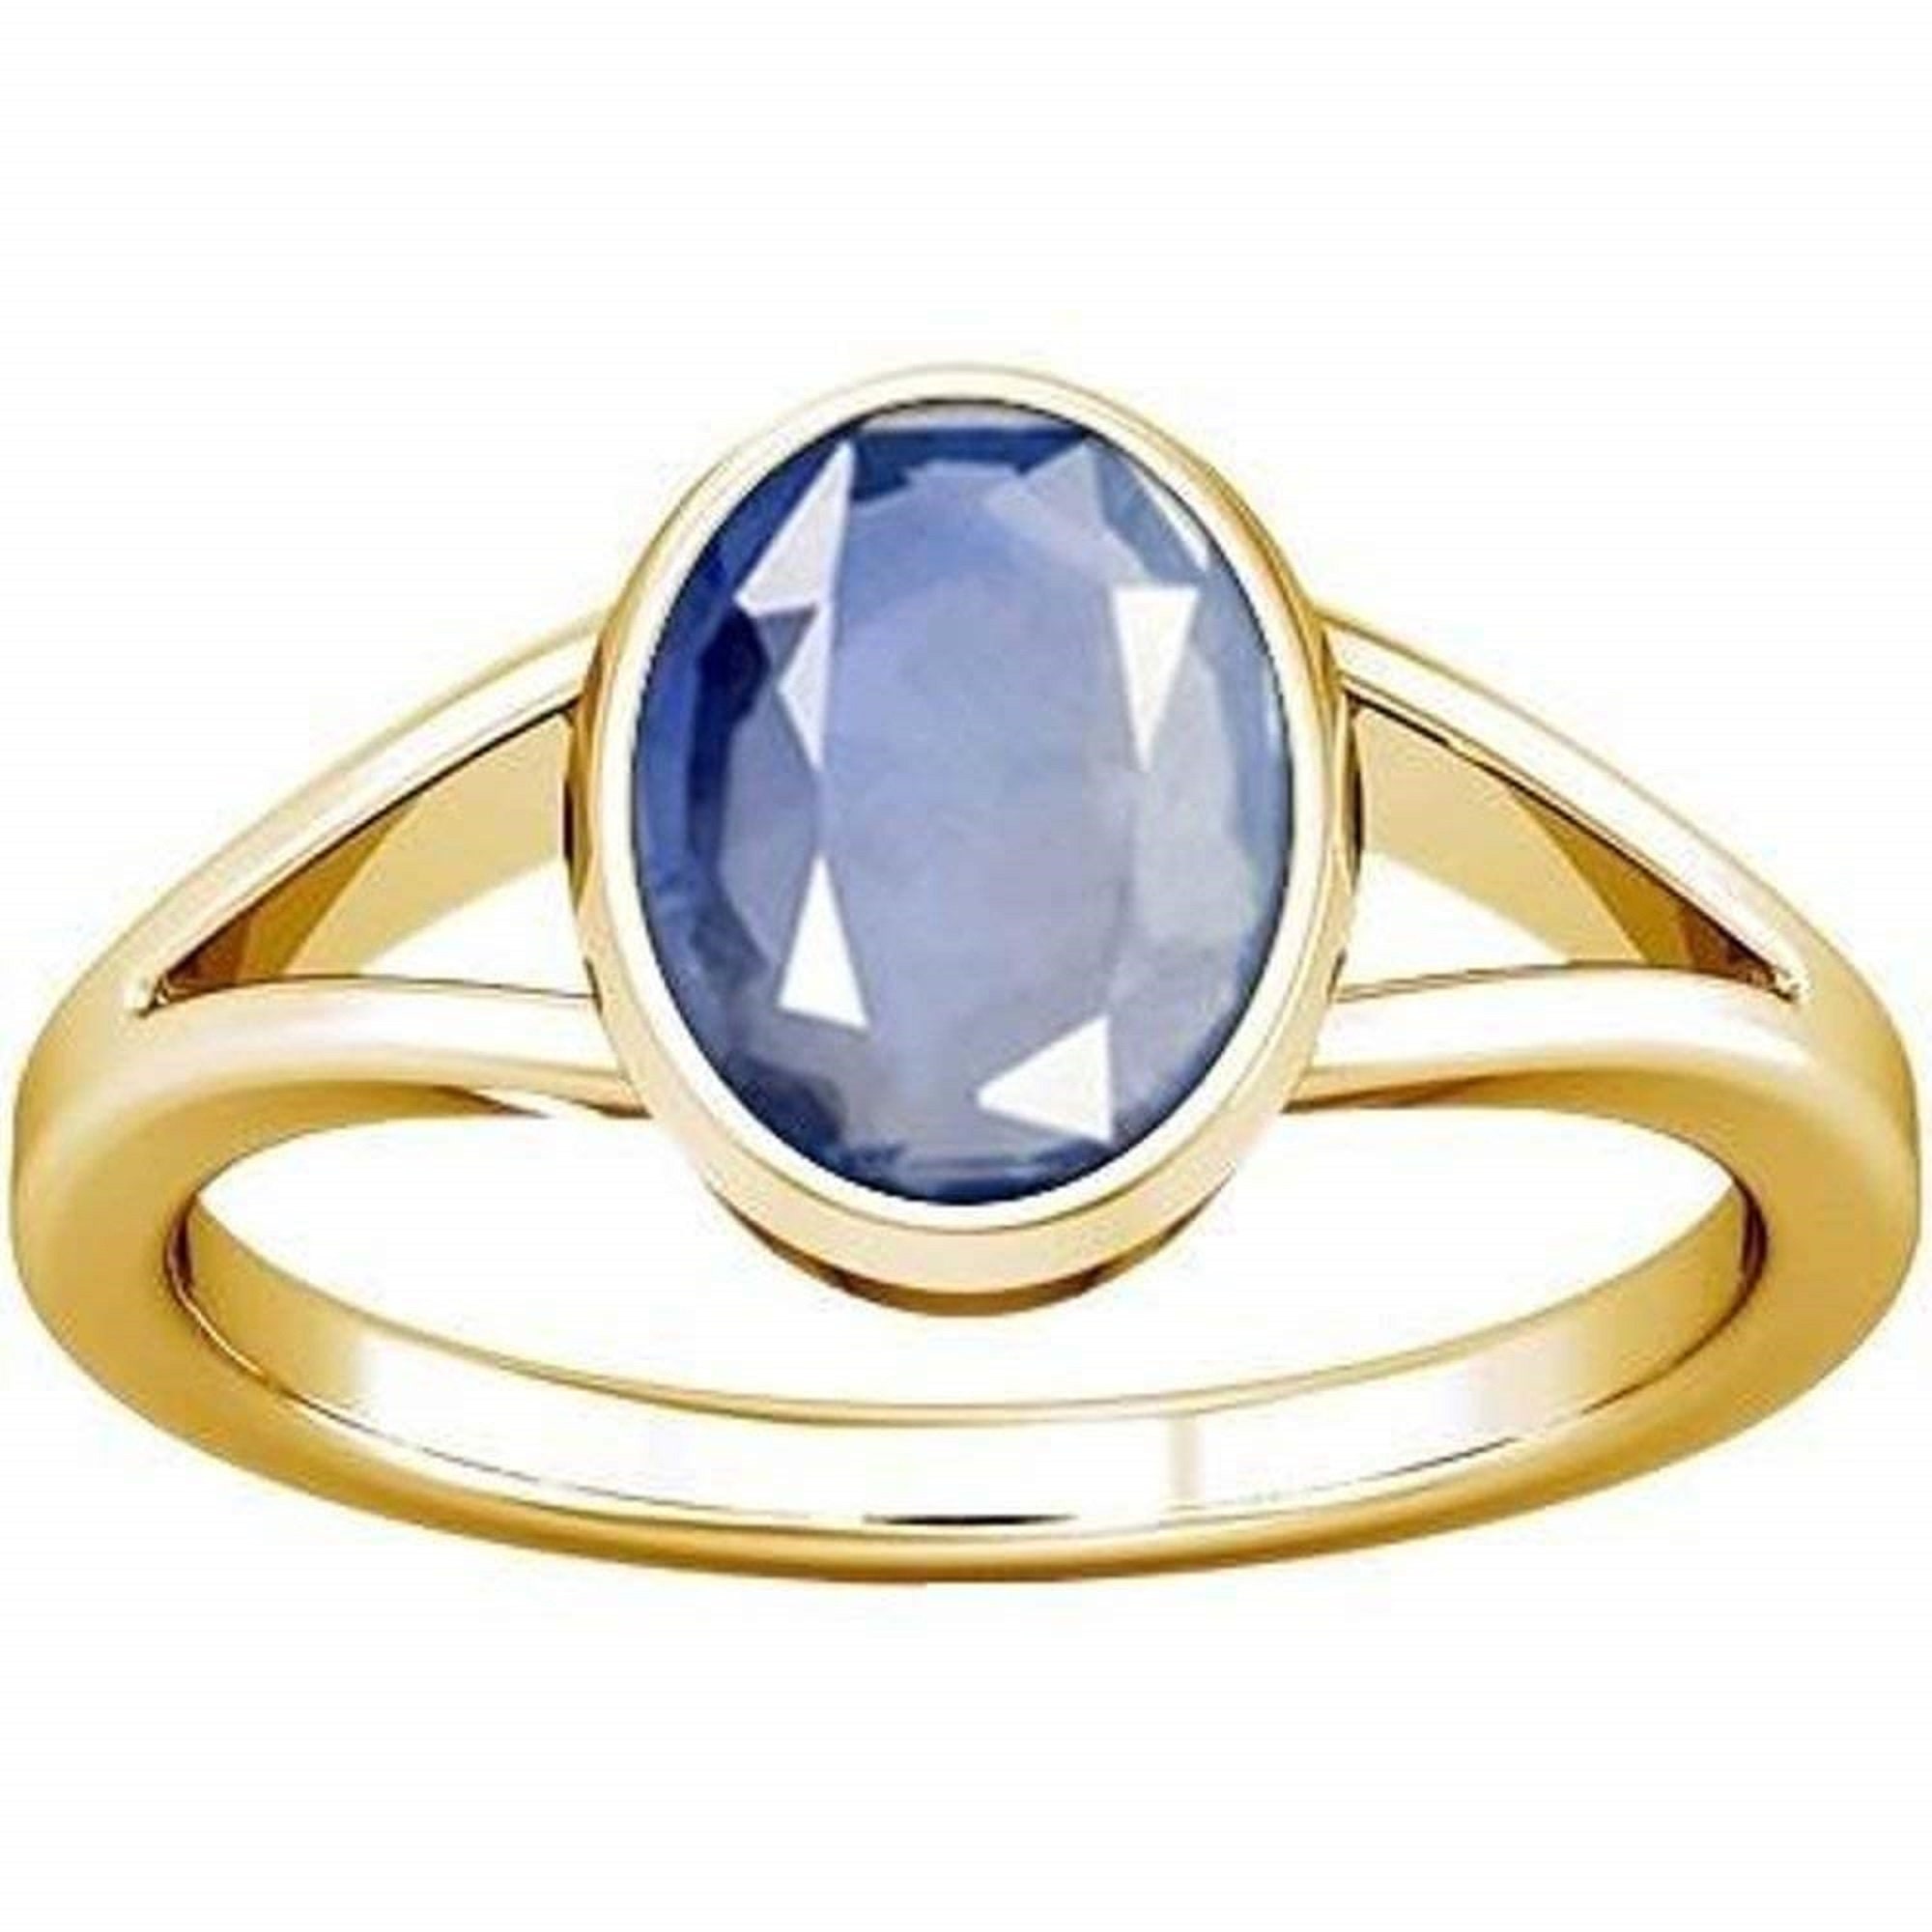 SIDHARTH GEMS Gemstone Ratna Blue Sapphire Neelam Gemstone Gold plated Ring  for Women and Men (10.25 ratti to 9.00 Carat) By Lab Certified : Amazon.in:  Jewellery